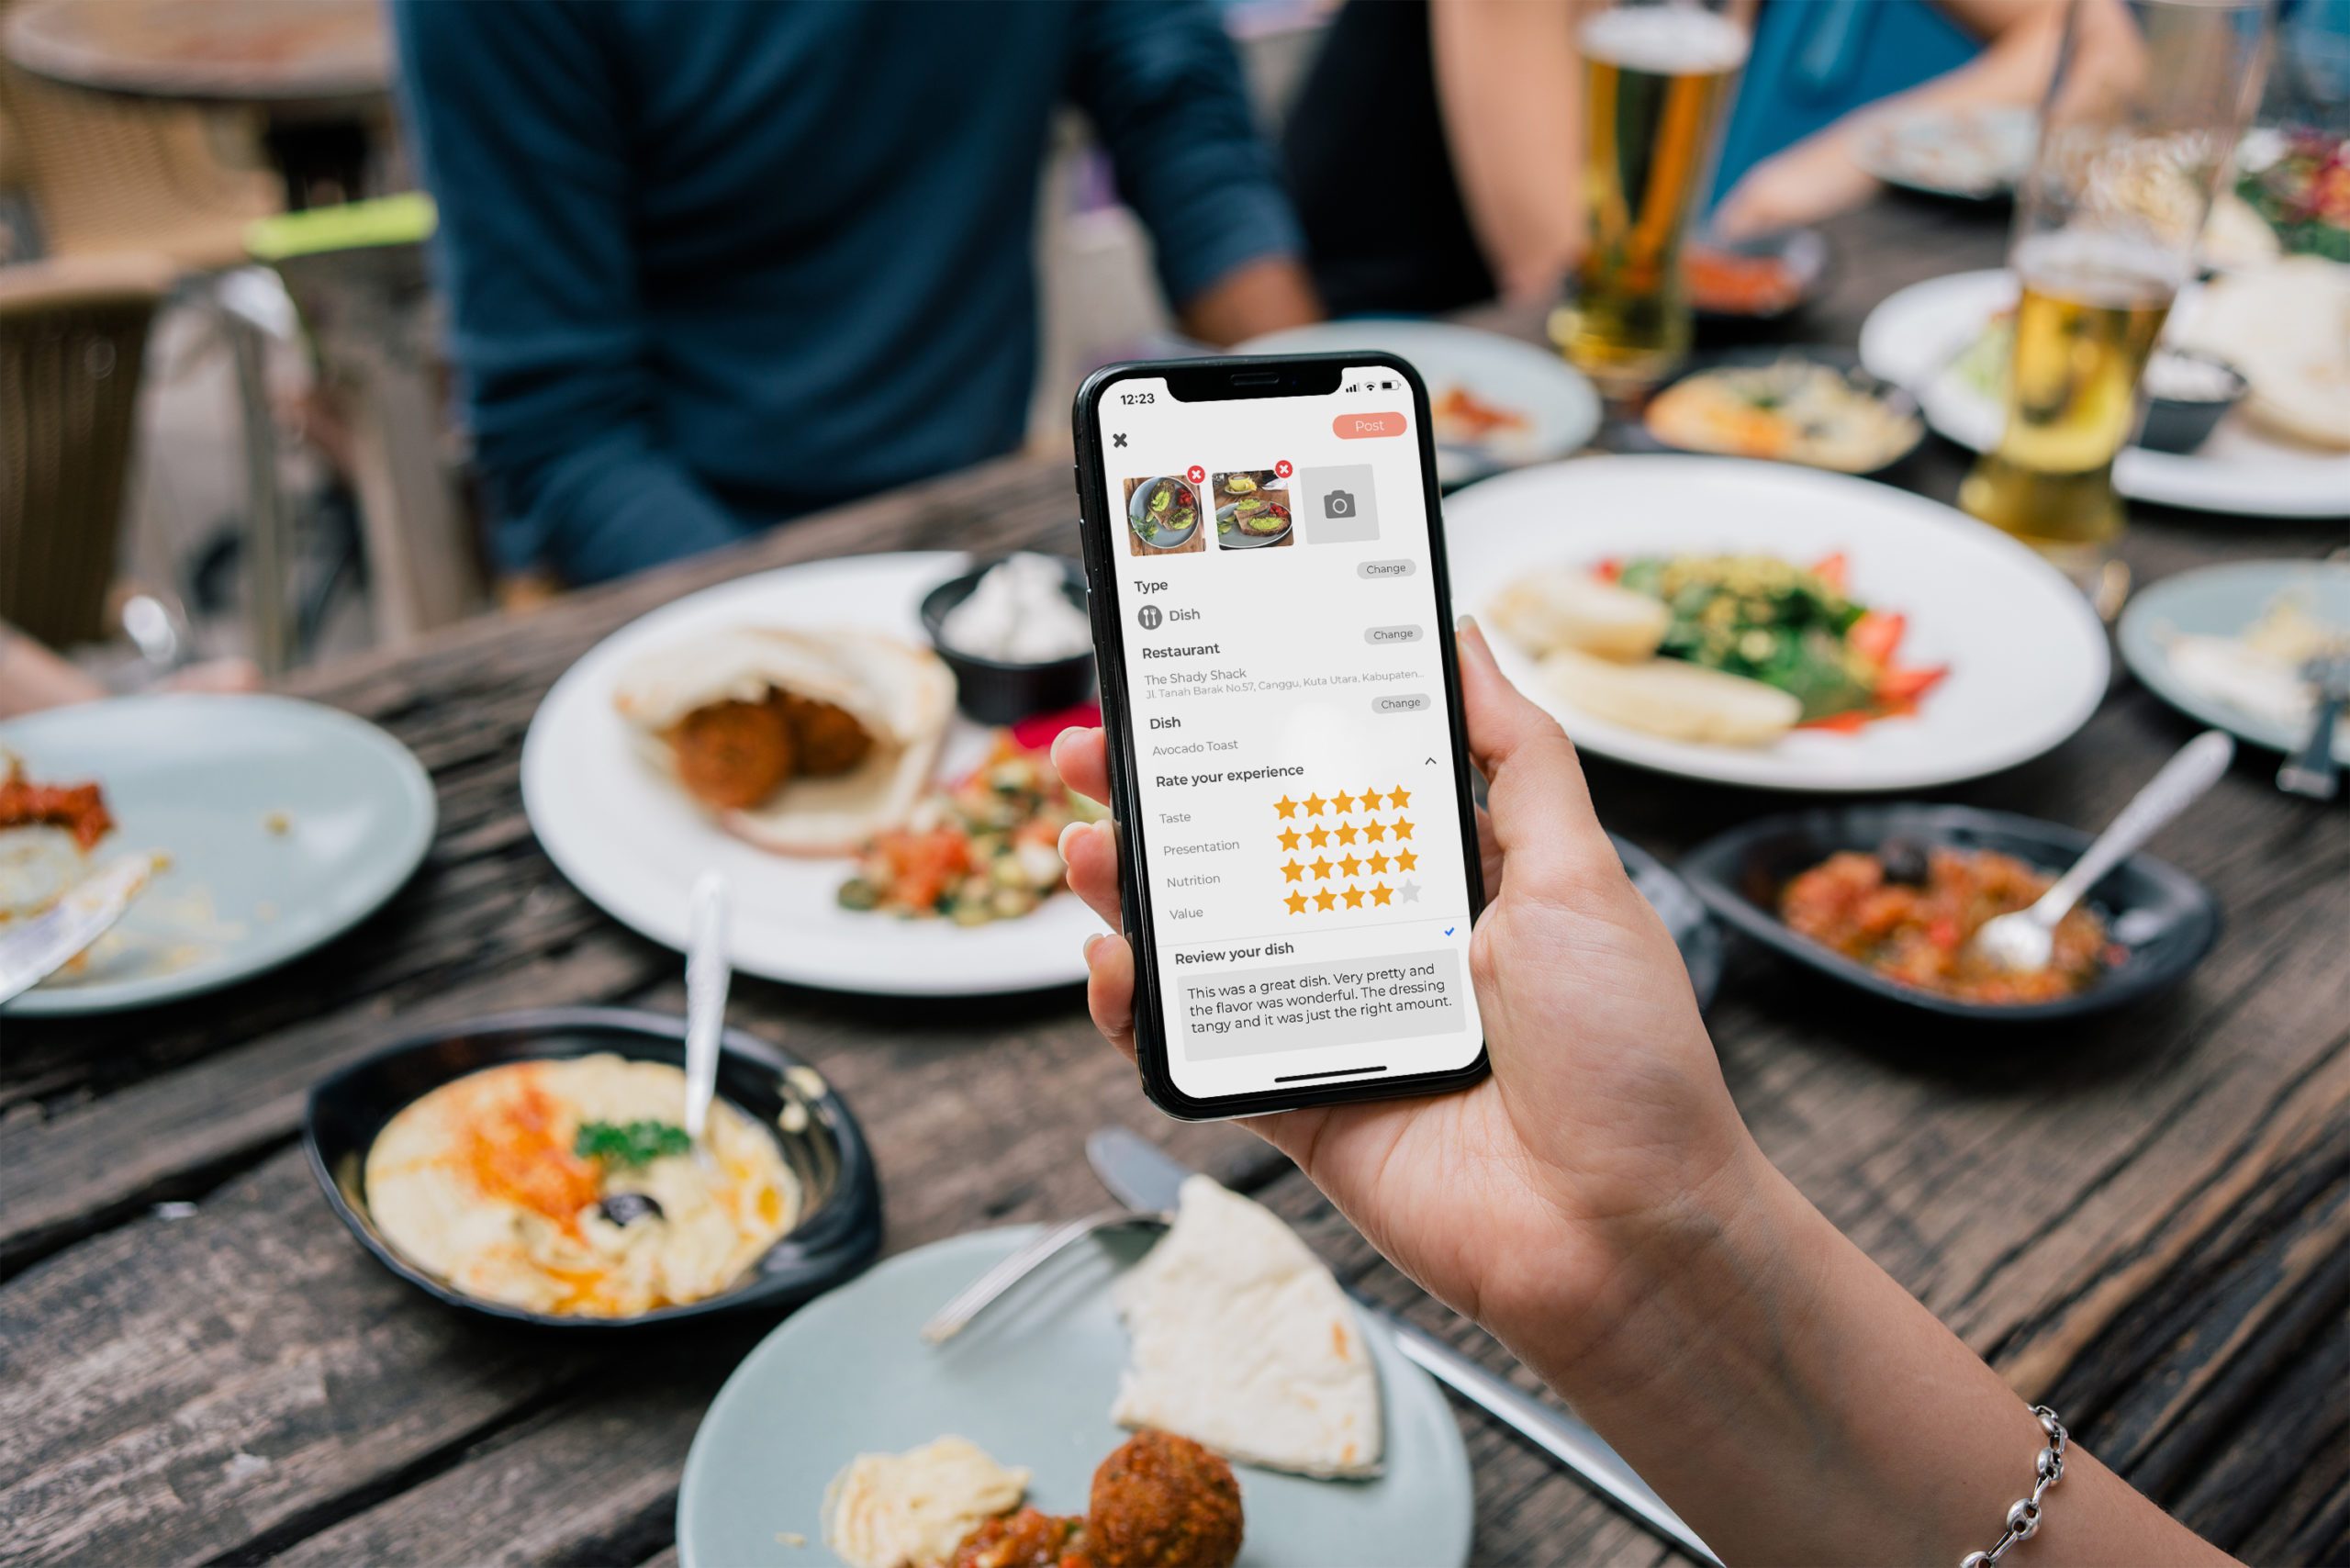 Vegan lifestyle app abillion seeks to raise up to $15m in Series A by July